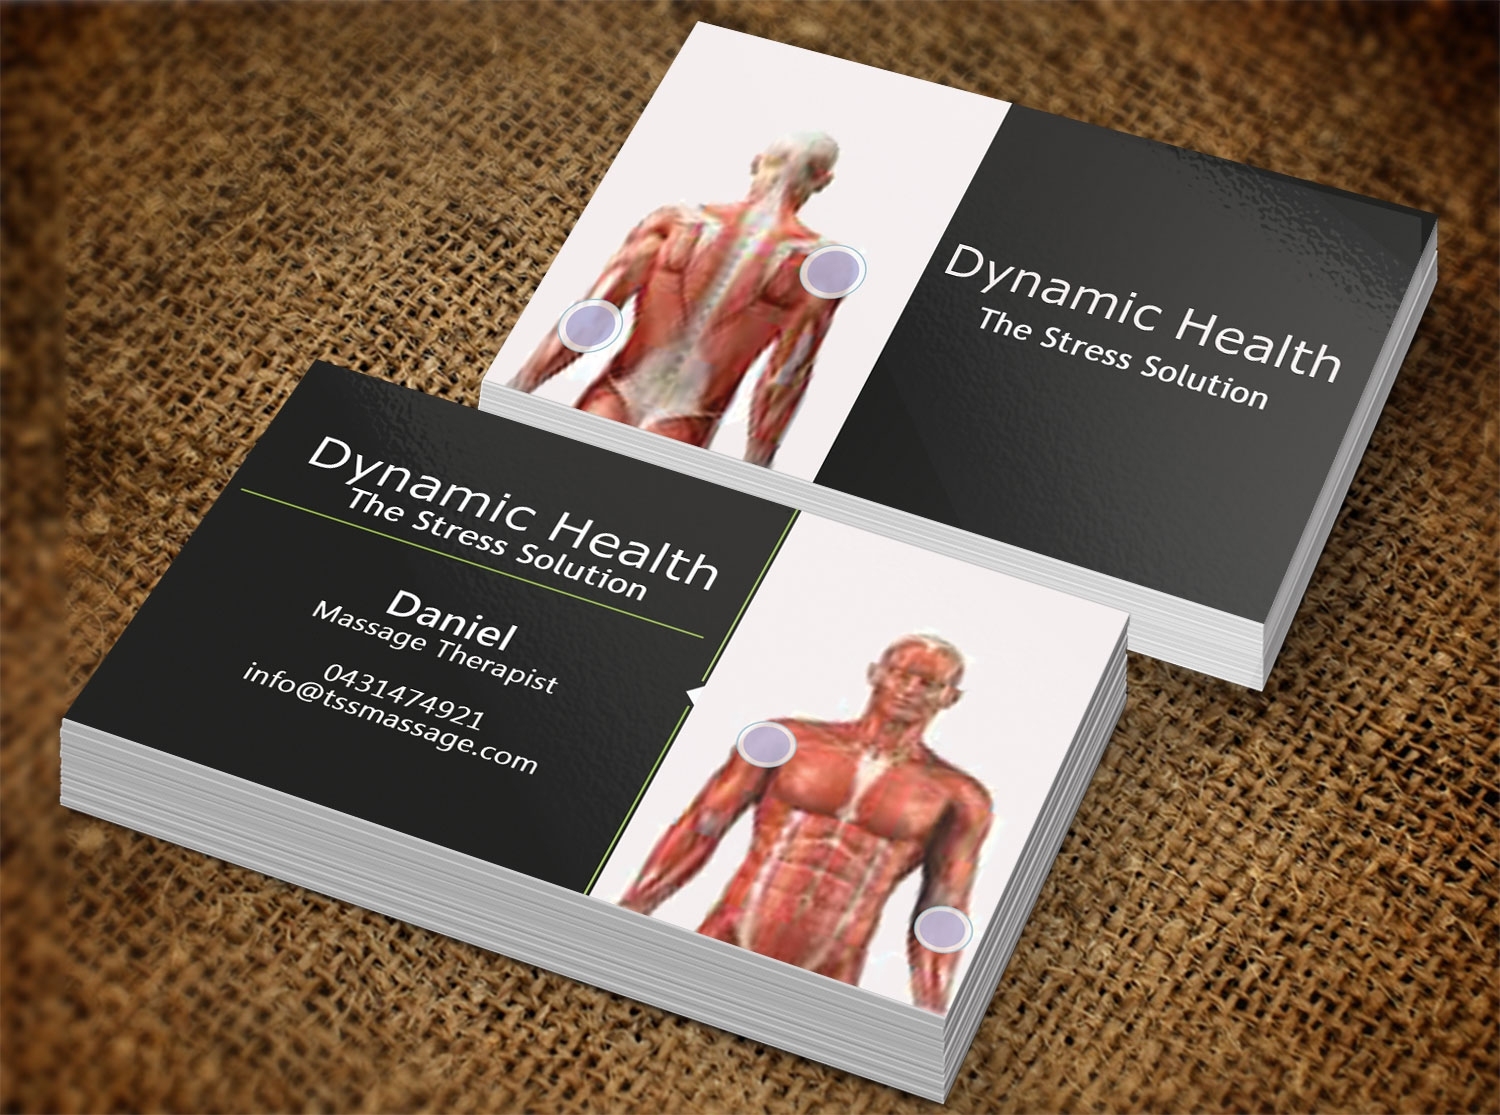 Massage Therapy Business Cards : Massage Business Cards | Zazzle / 3.5 pertaining to Massage Therapy Business Card Templates